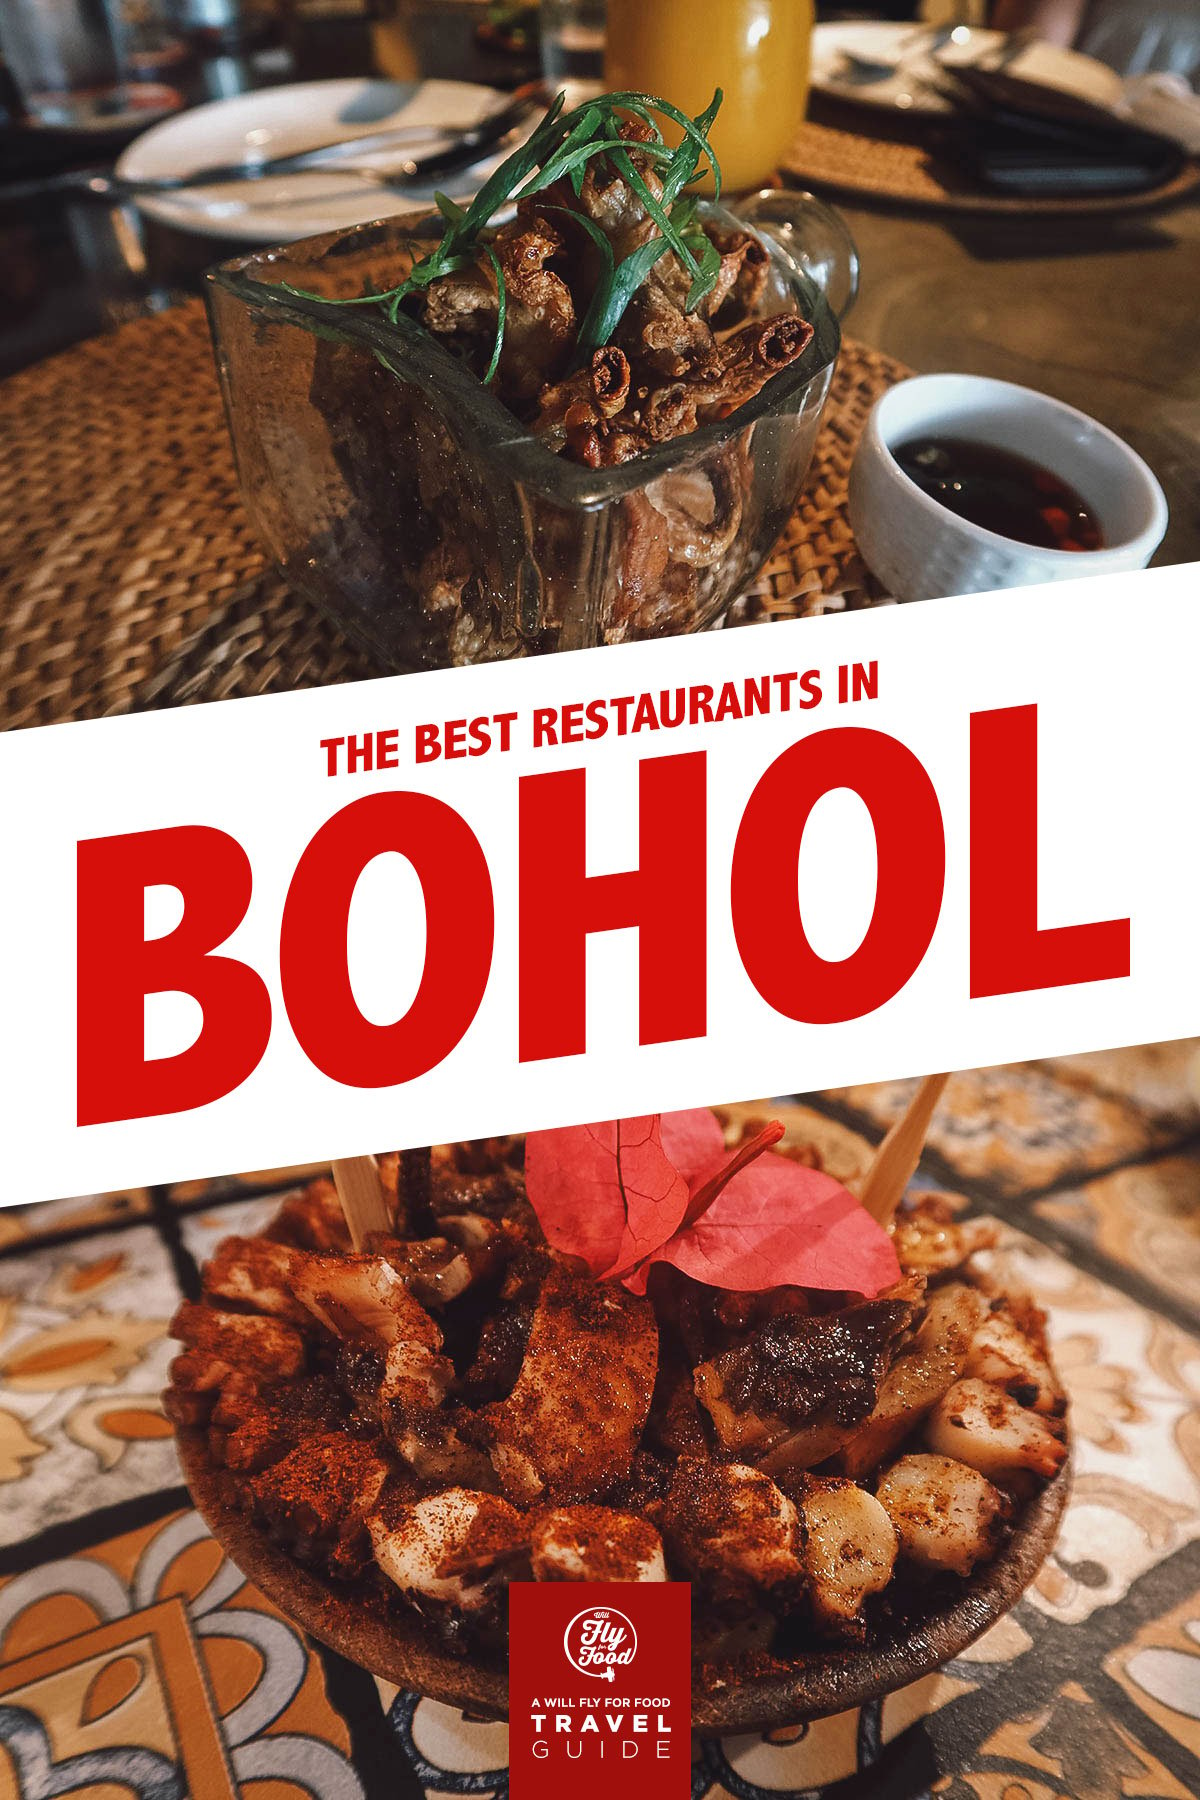 Dishes from restaurants in Bohol, Philippines